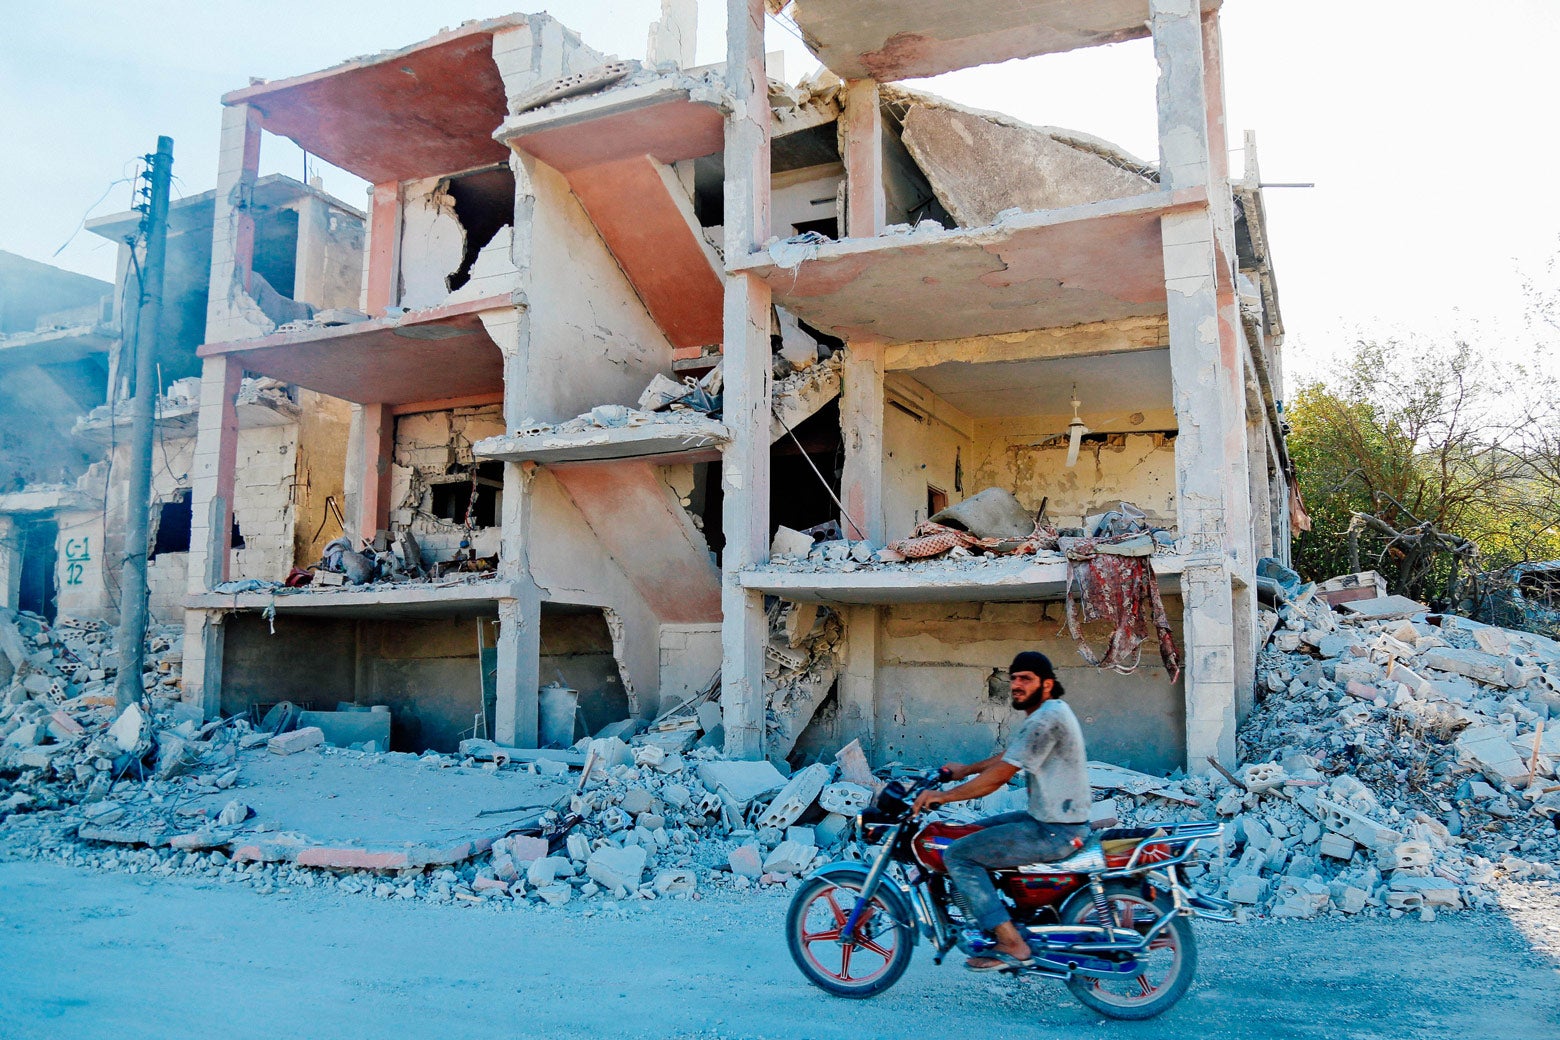 A Syrian man rides a motorcycle past a destroyed building.